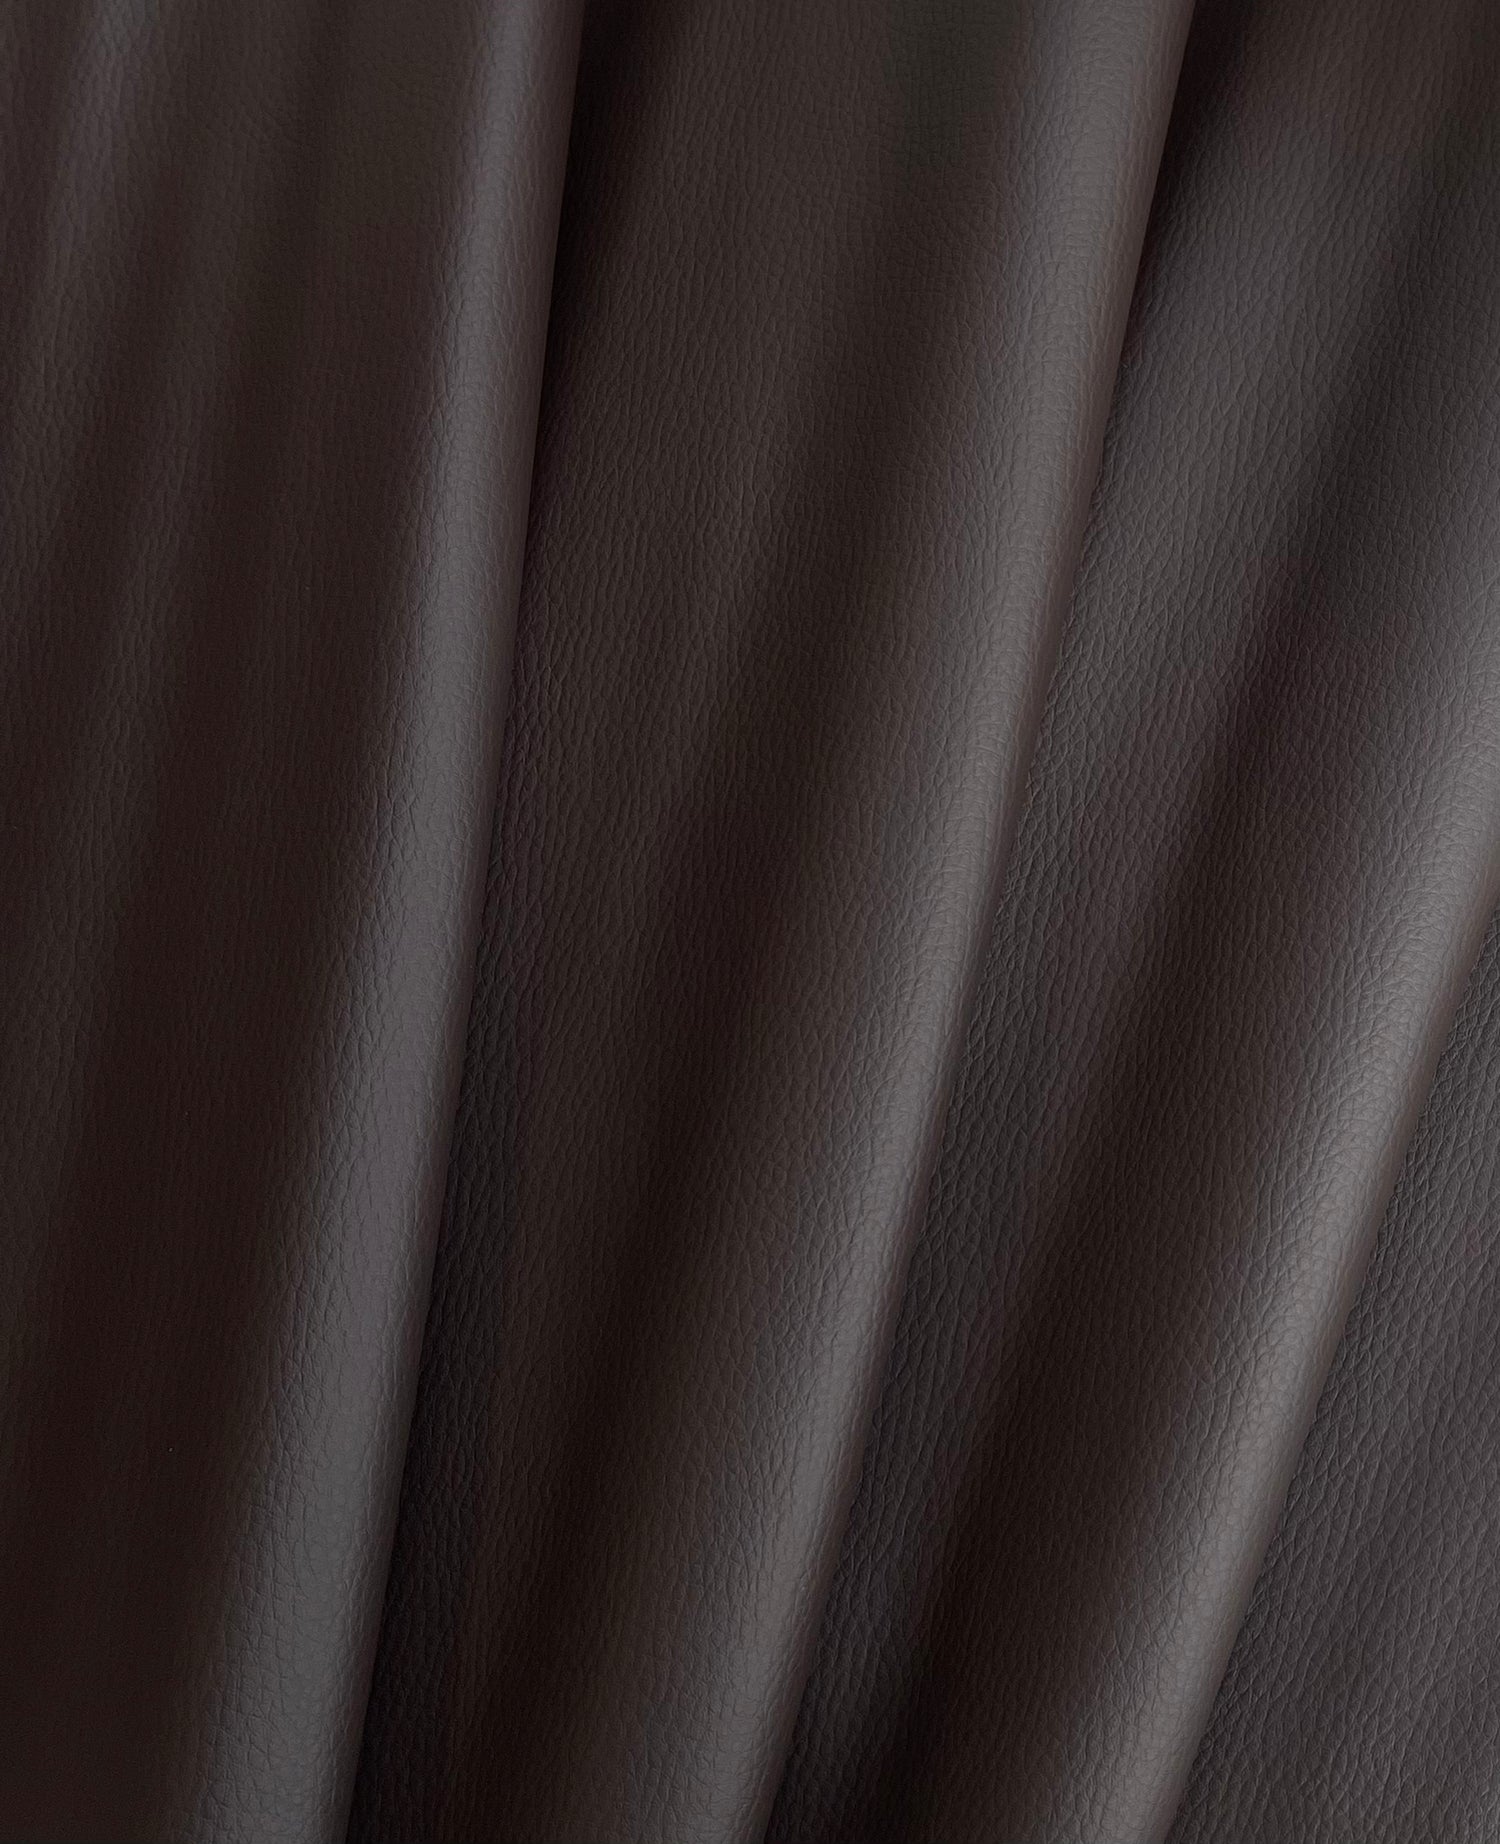 Dark Brown Pebble Textured Faux Leather sheet